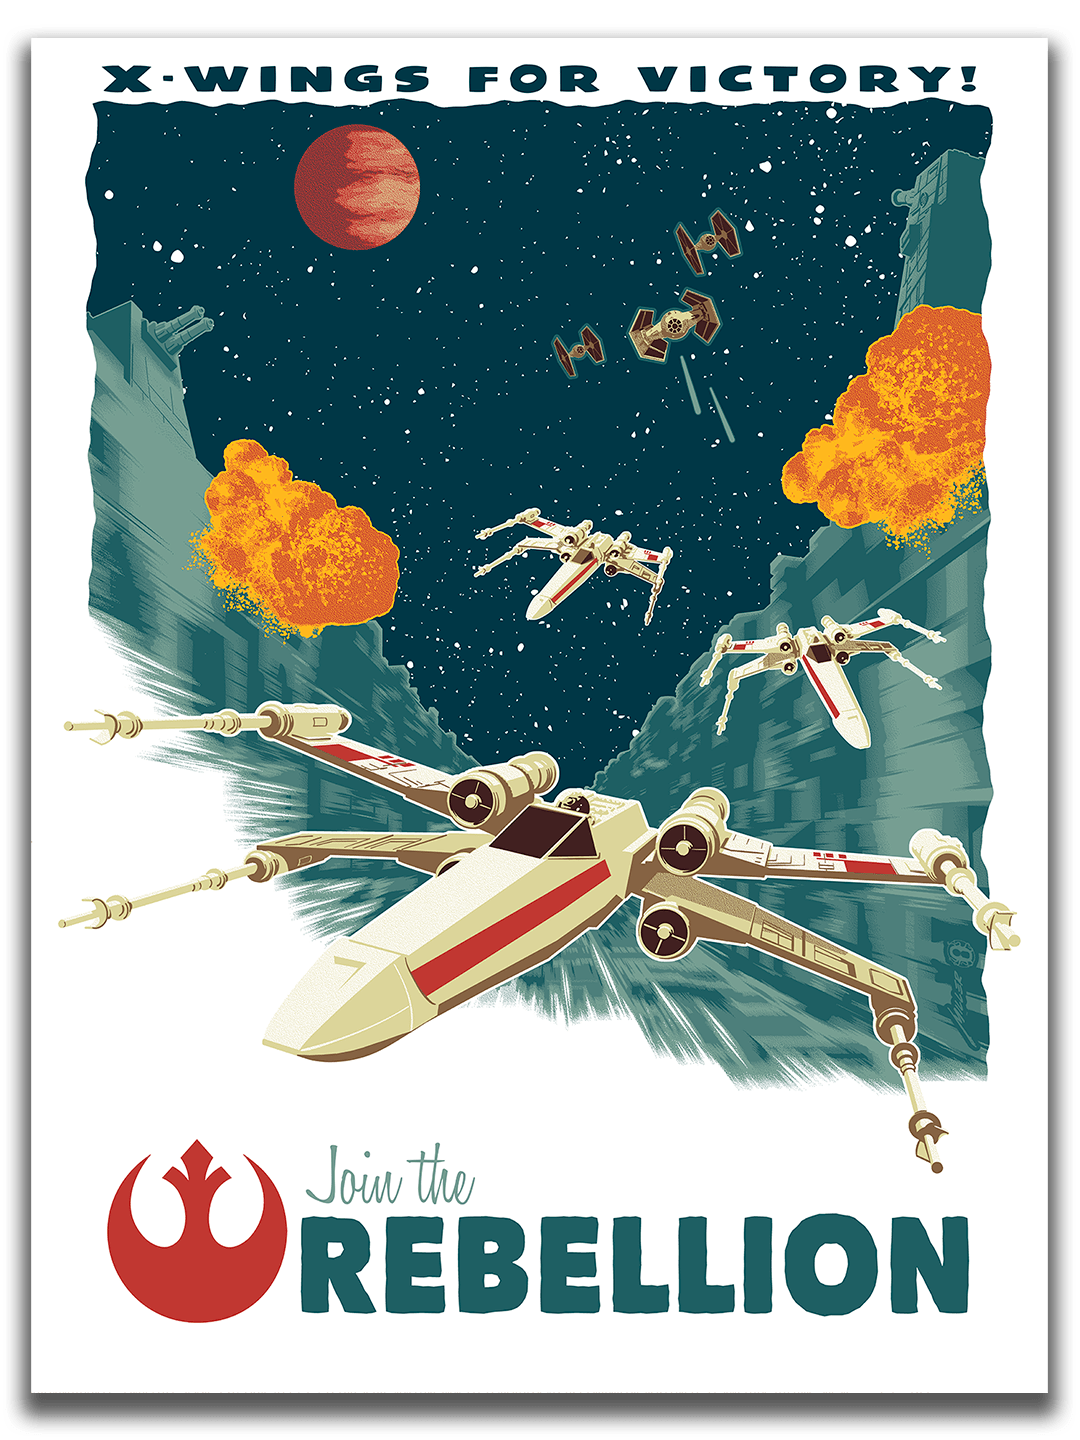 Star Wars art poster print "Rebels for Victory" by Brian Miller 